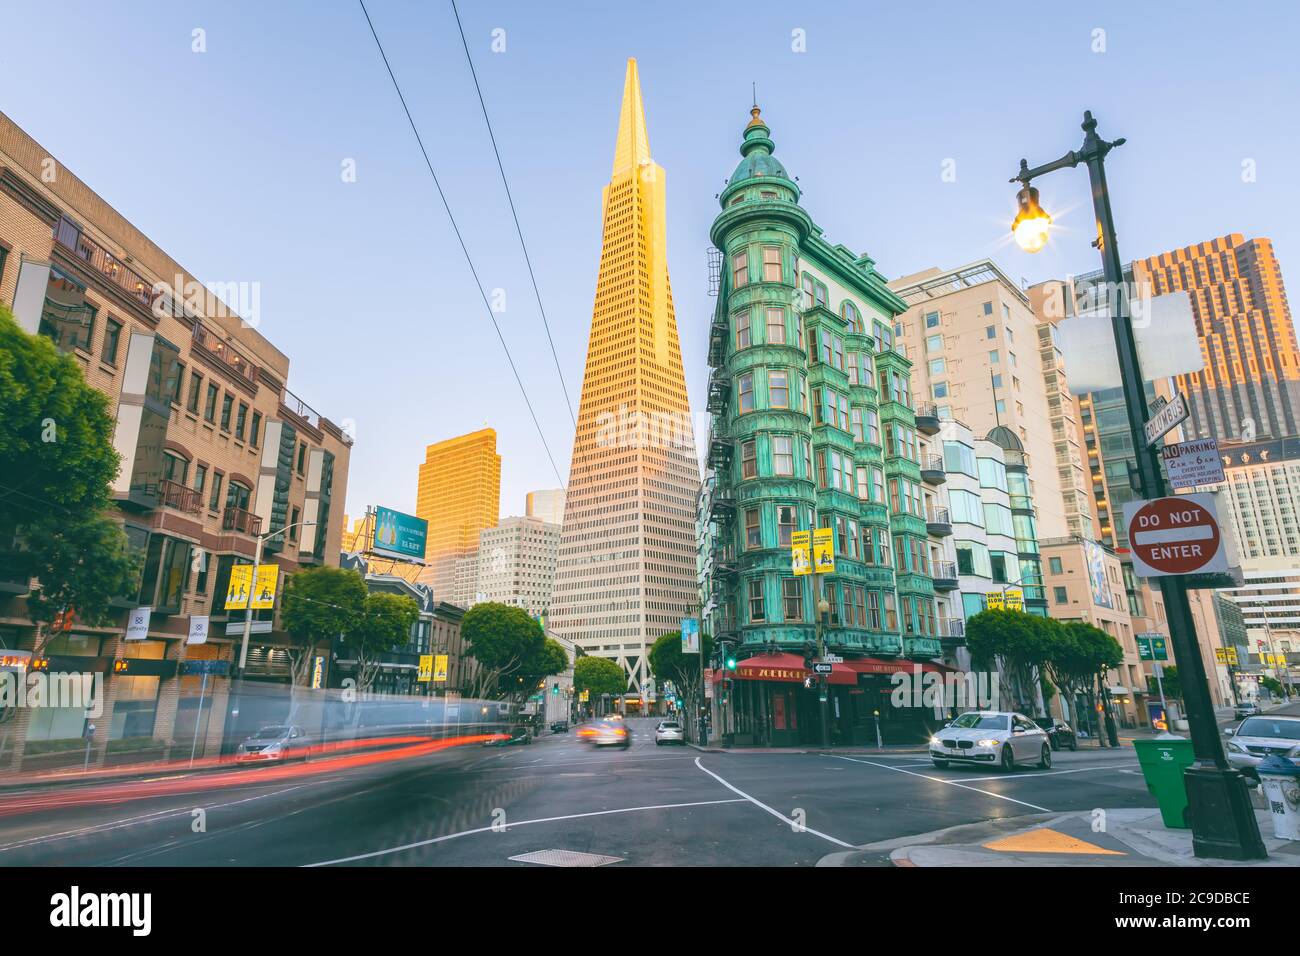 View of the iconic TranAmerica Pyramid from the Columbus Street at North Beach, San Francisco, California, USA. Stock Photo